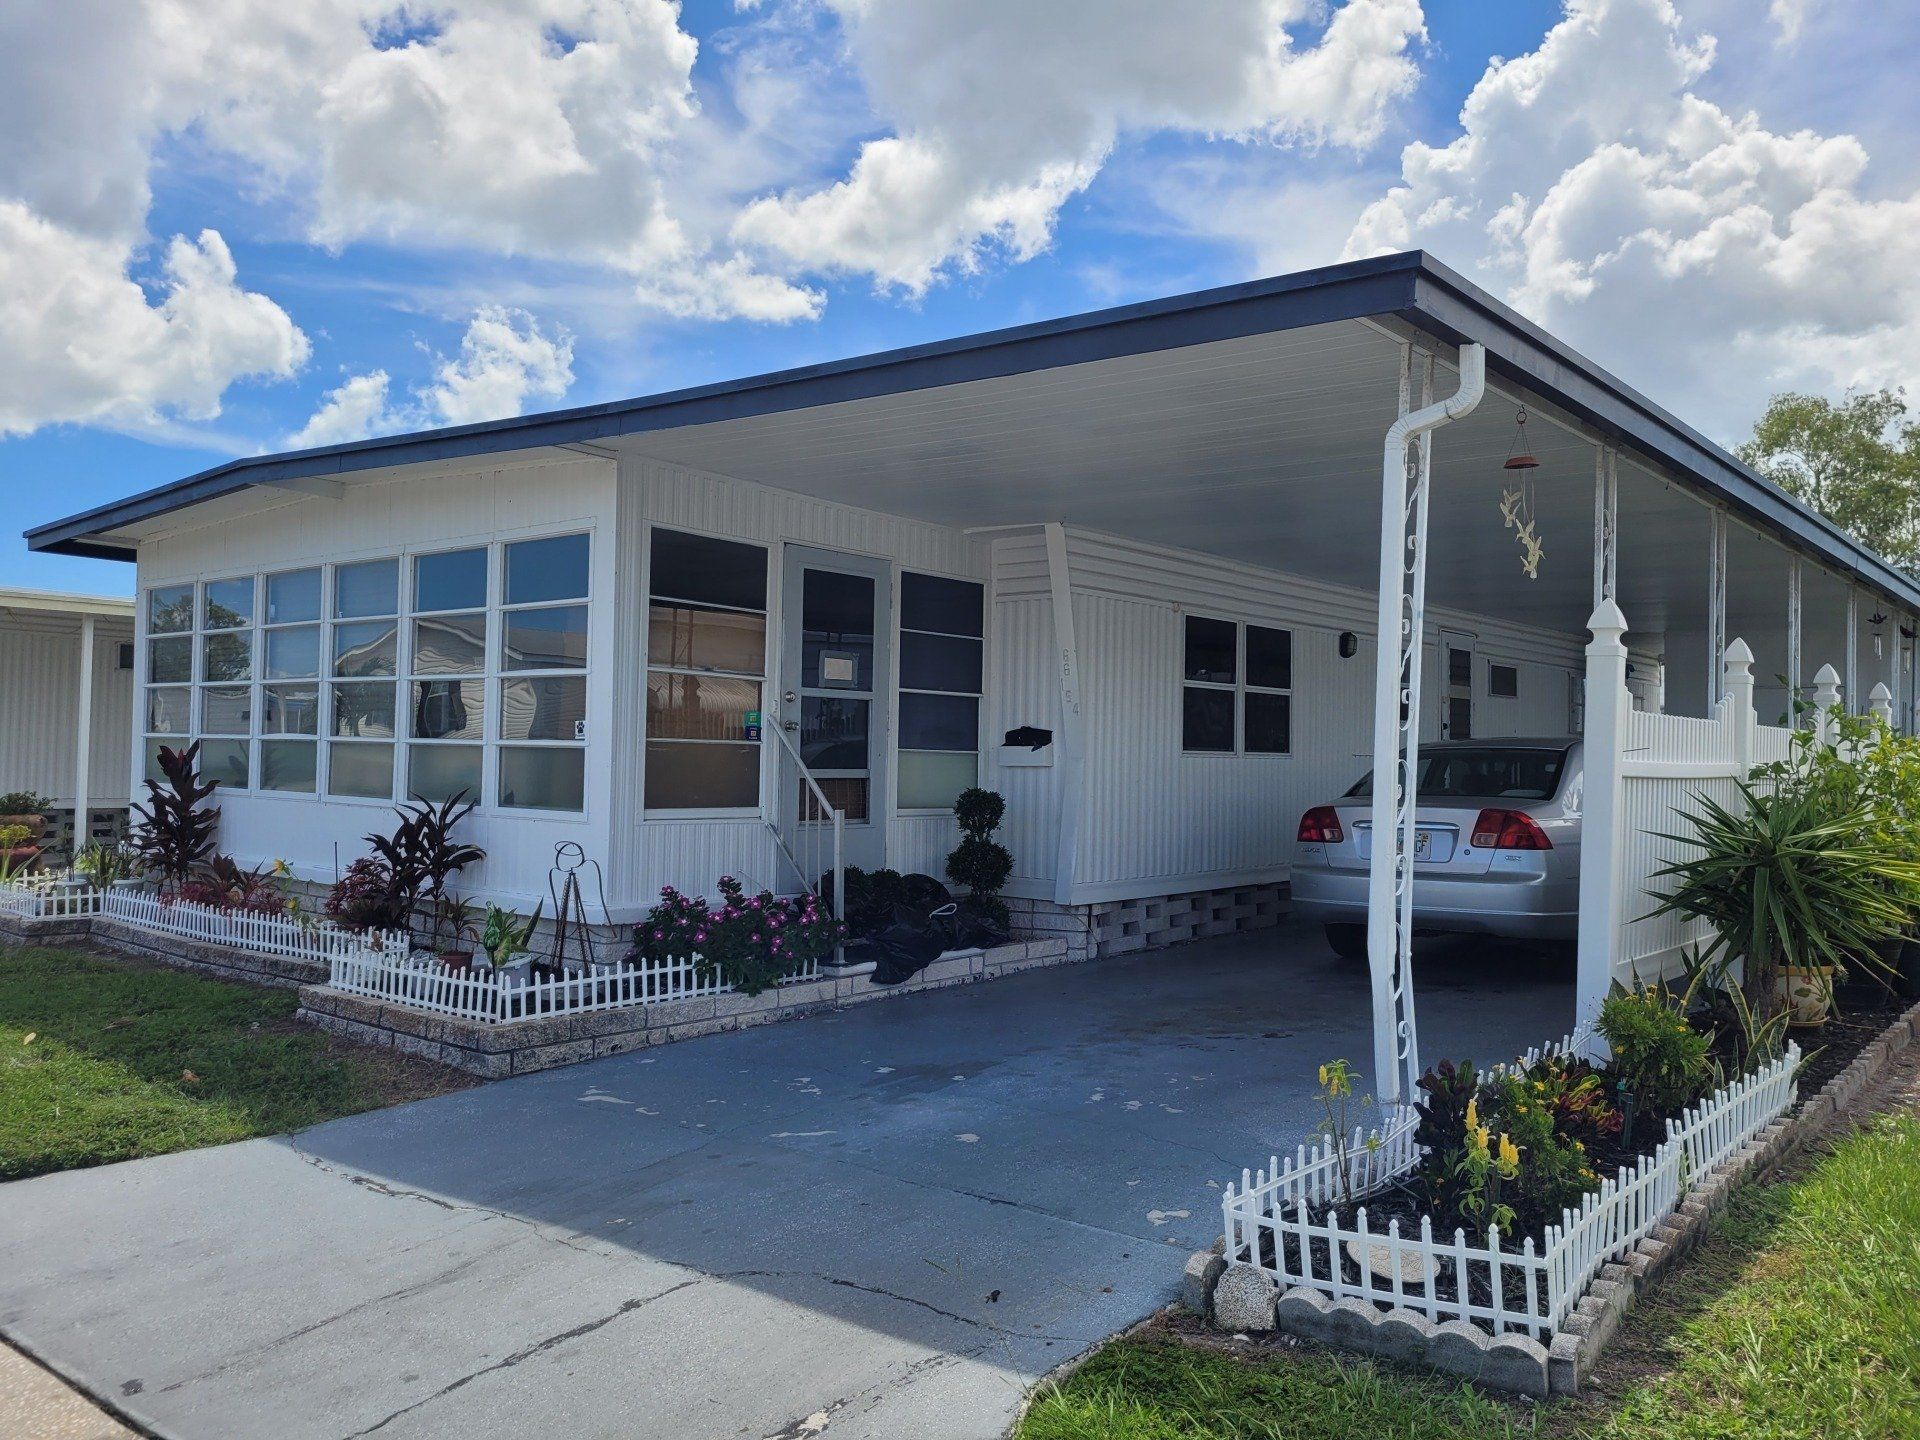 Sell Mobile Home clearwater, Sell My Mobile Home Clearwater, Largo, St Petersburg & Pinellas County